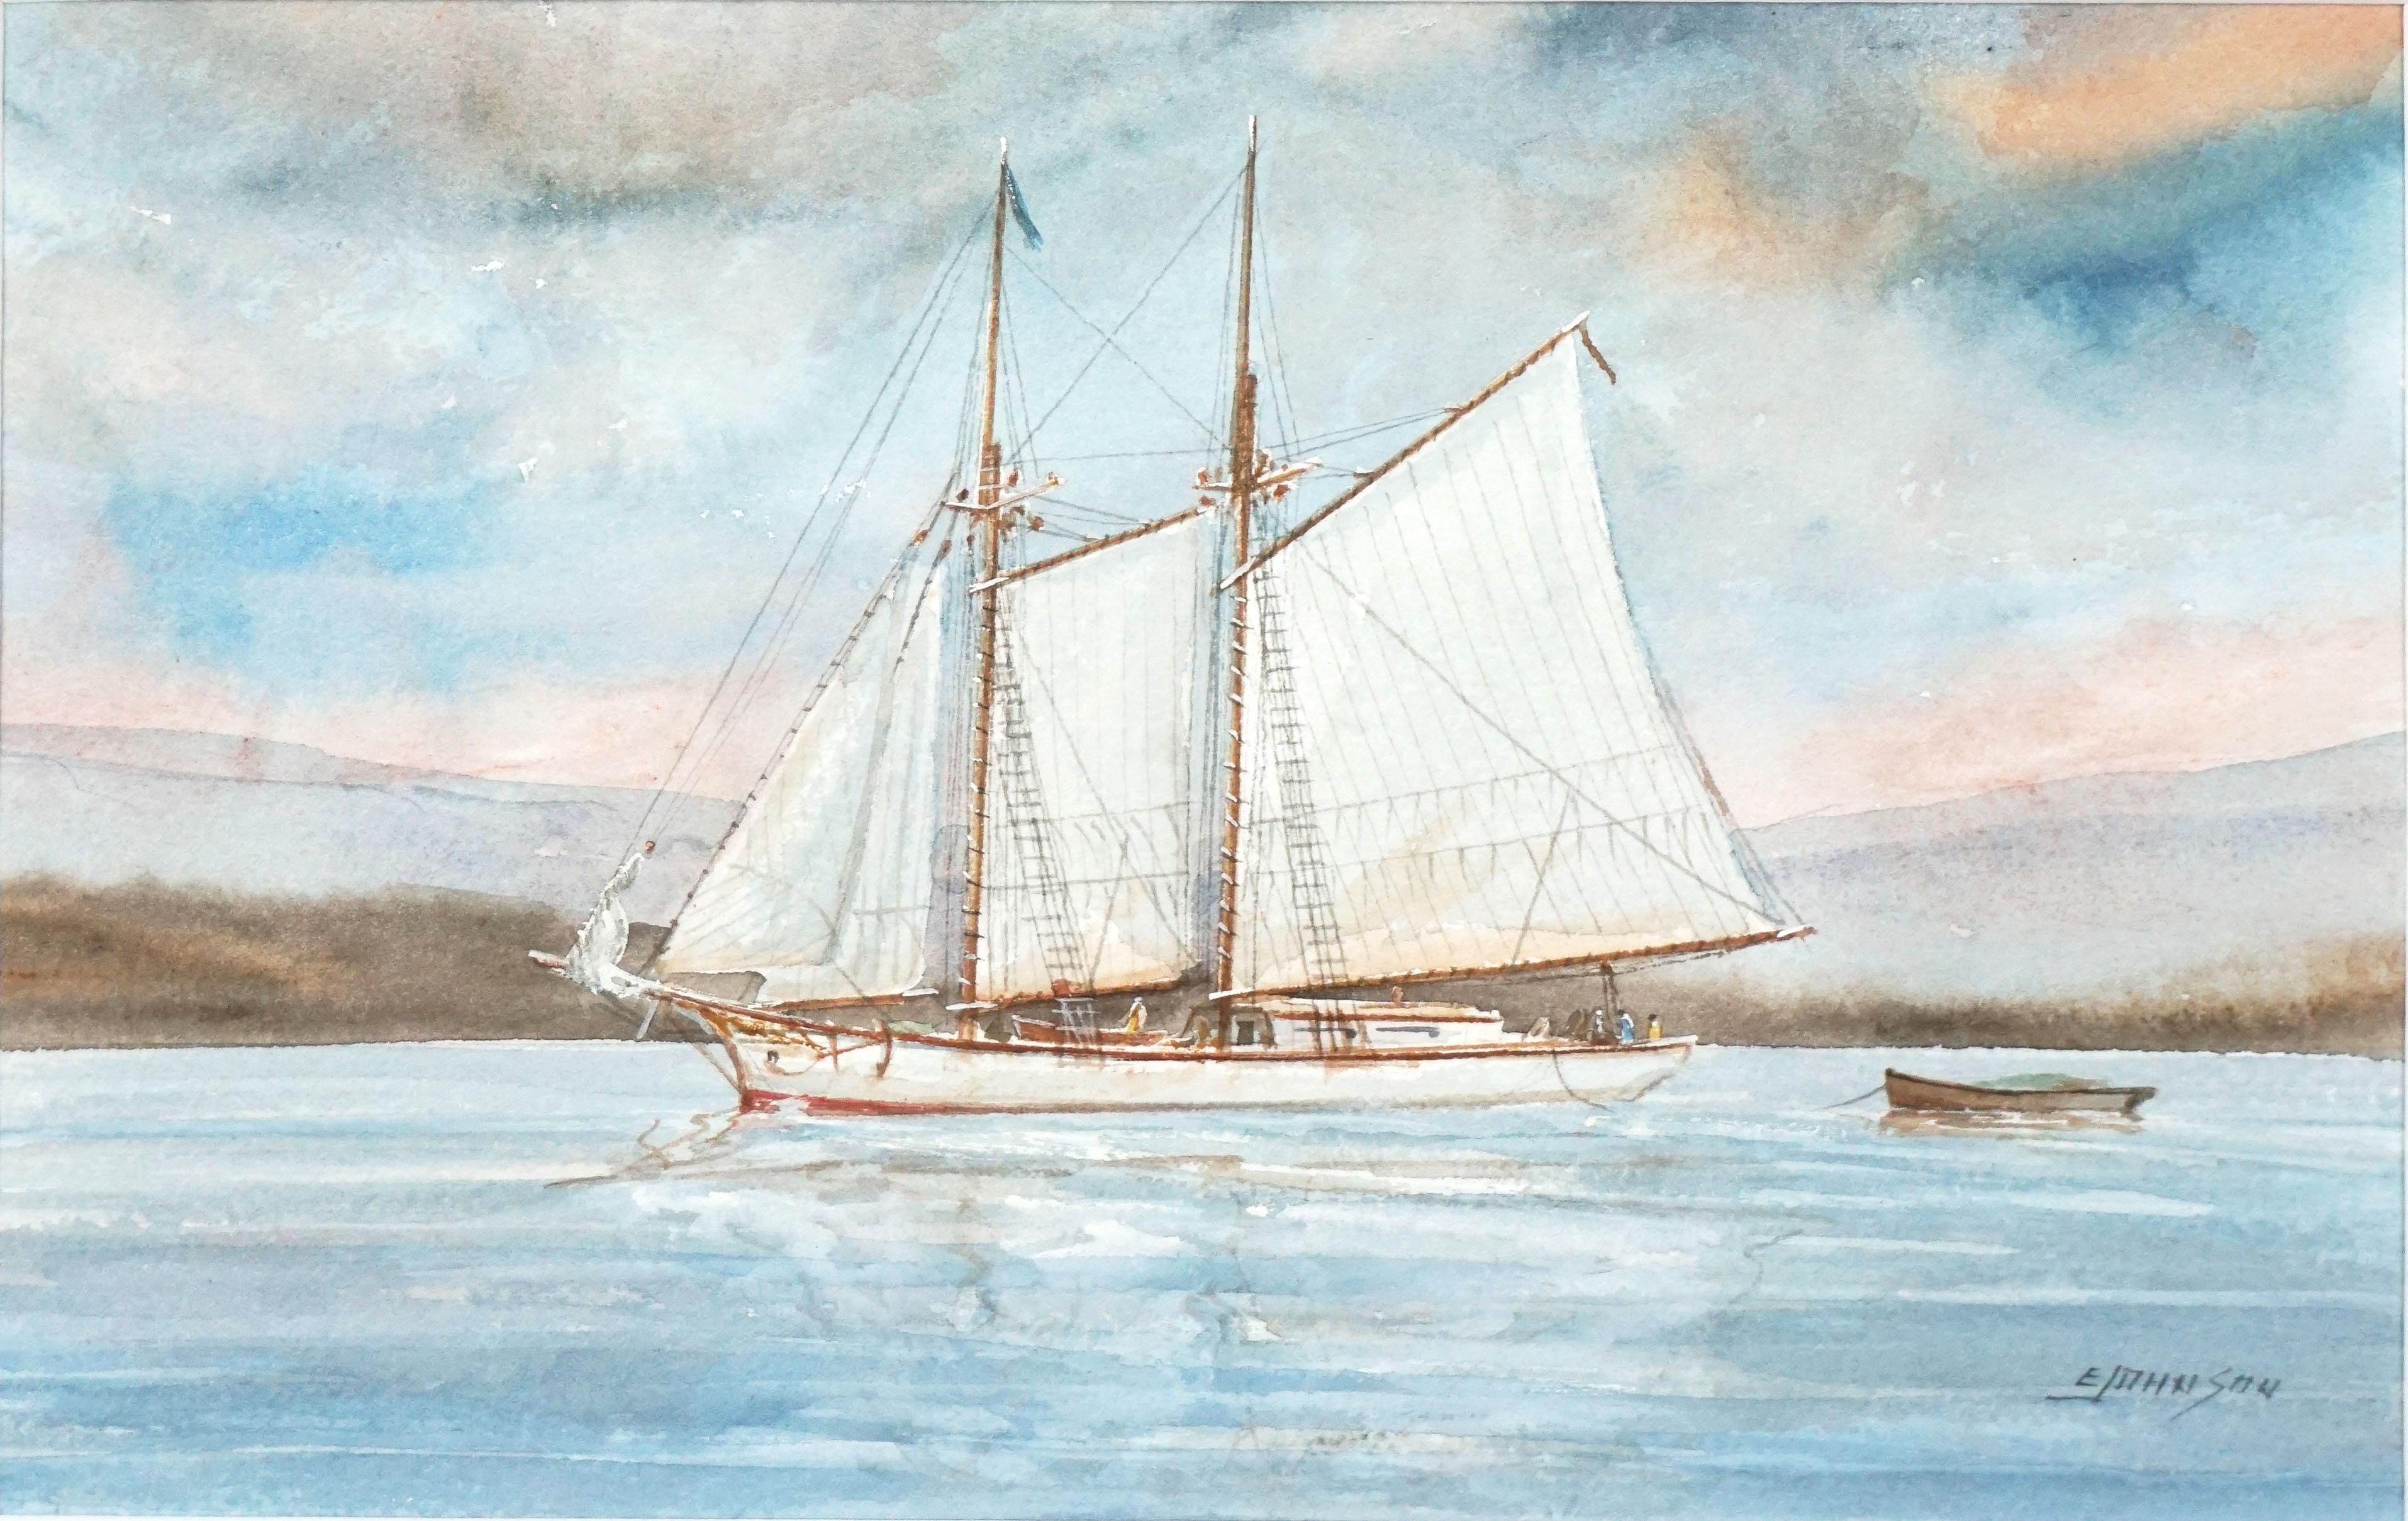 Two-Masted Schooner Sailing off Mohegan Island, Maine - Painting by Edmond Johnson